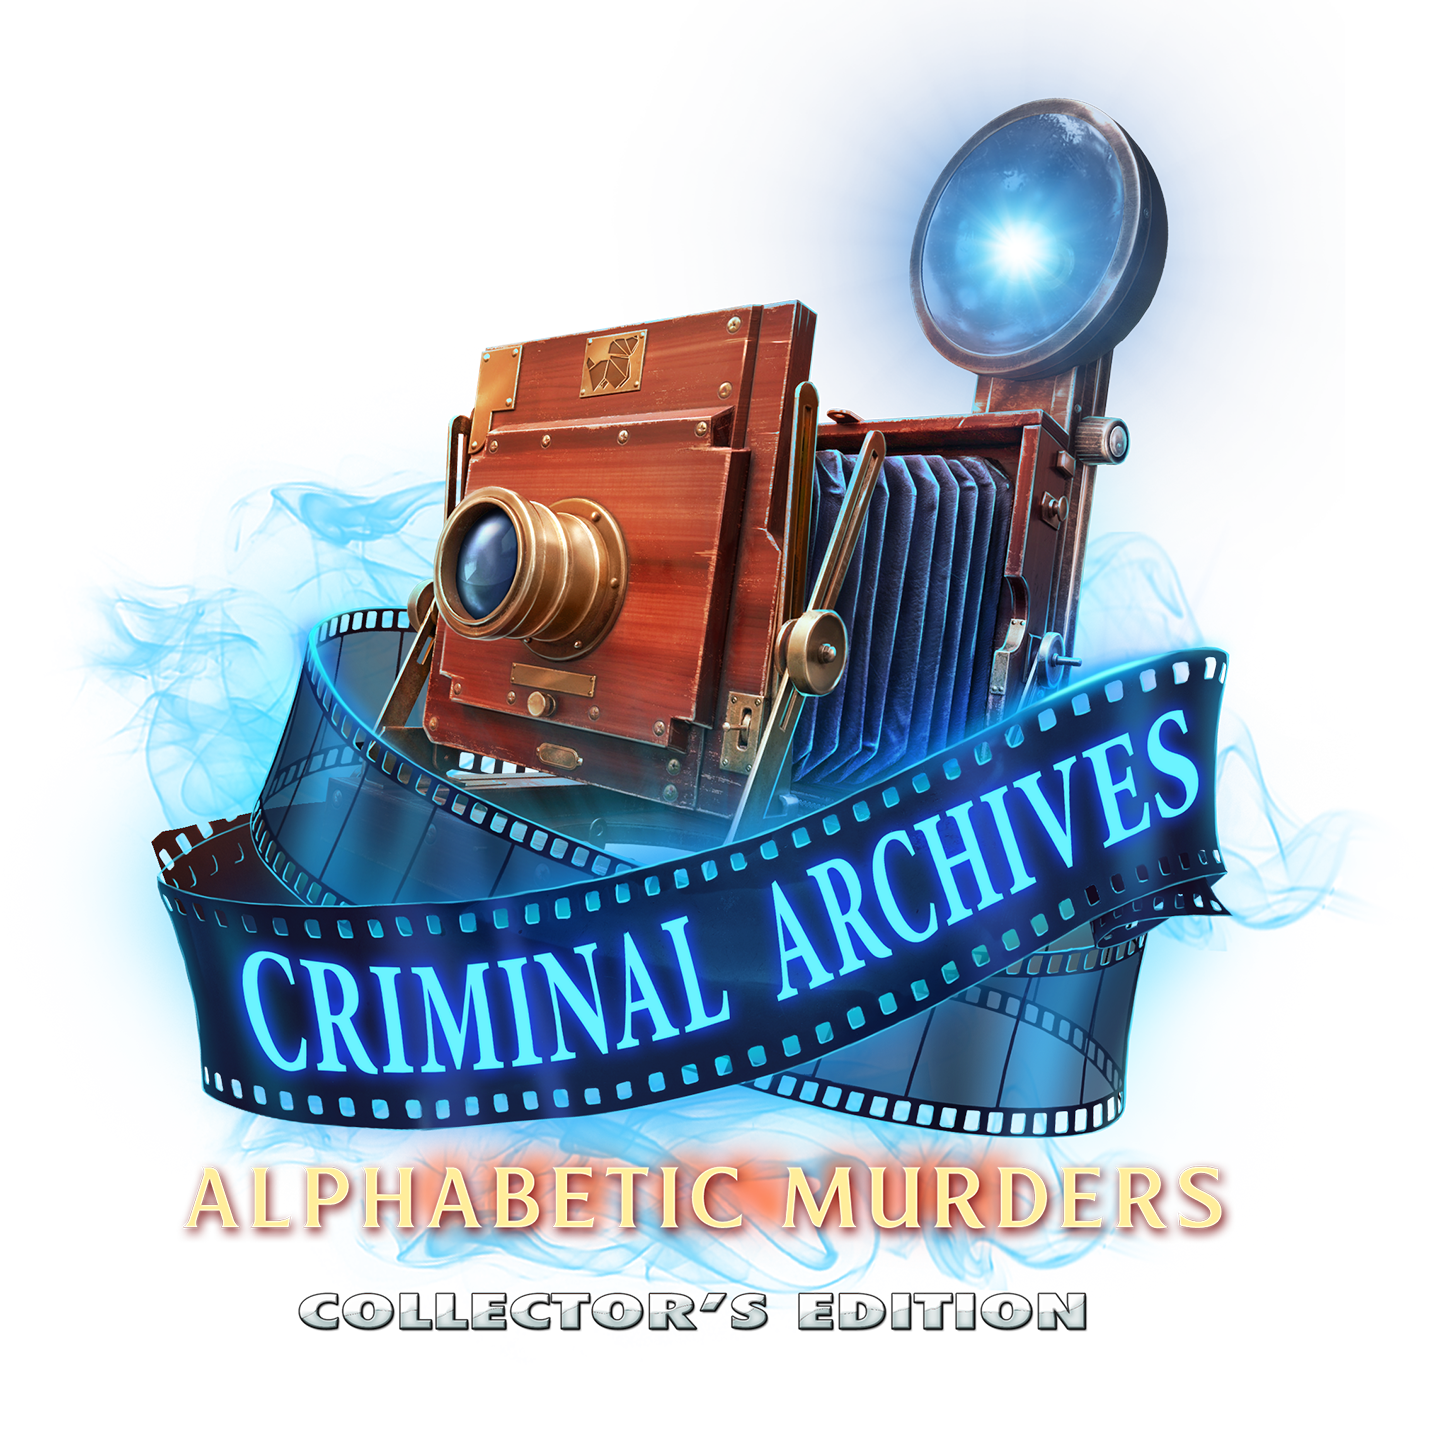 Criminal Archives: Alphabetic Murders Collector's Edition